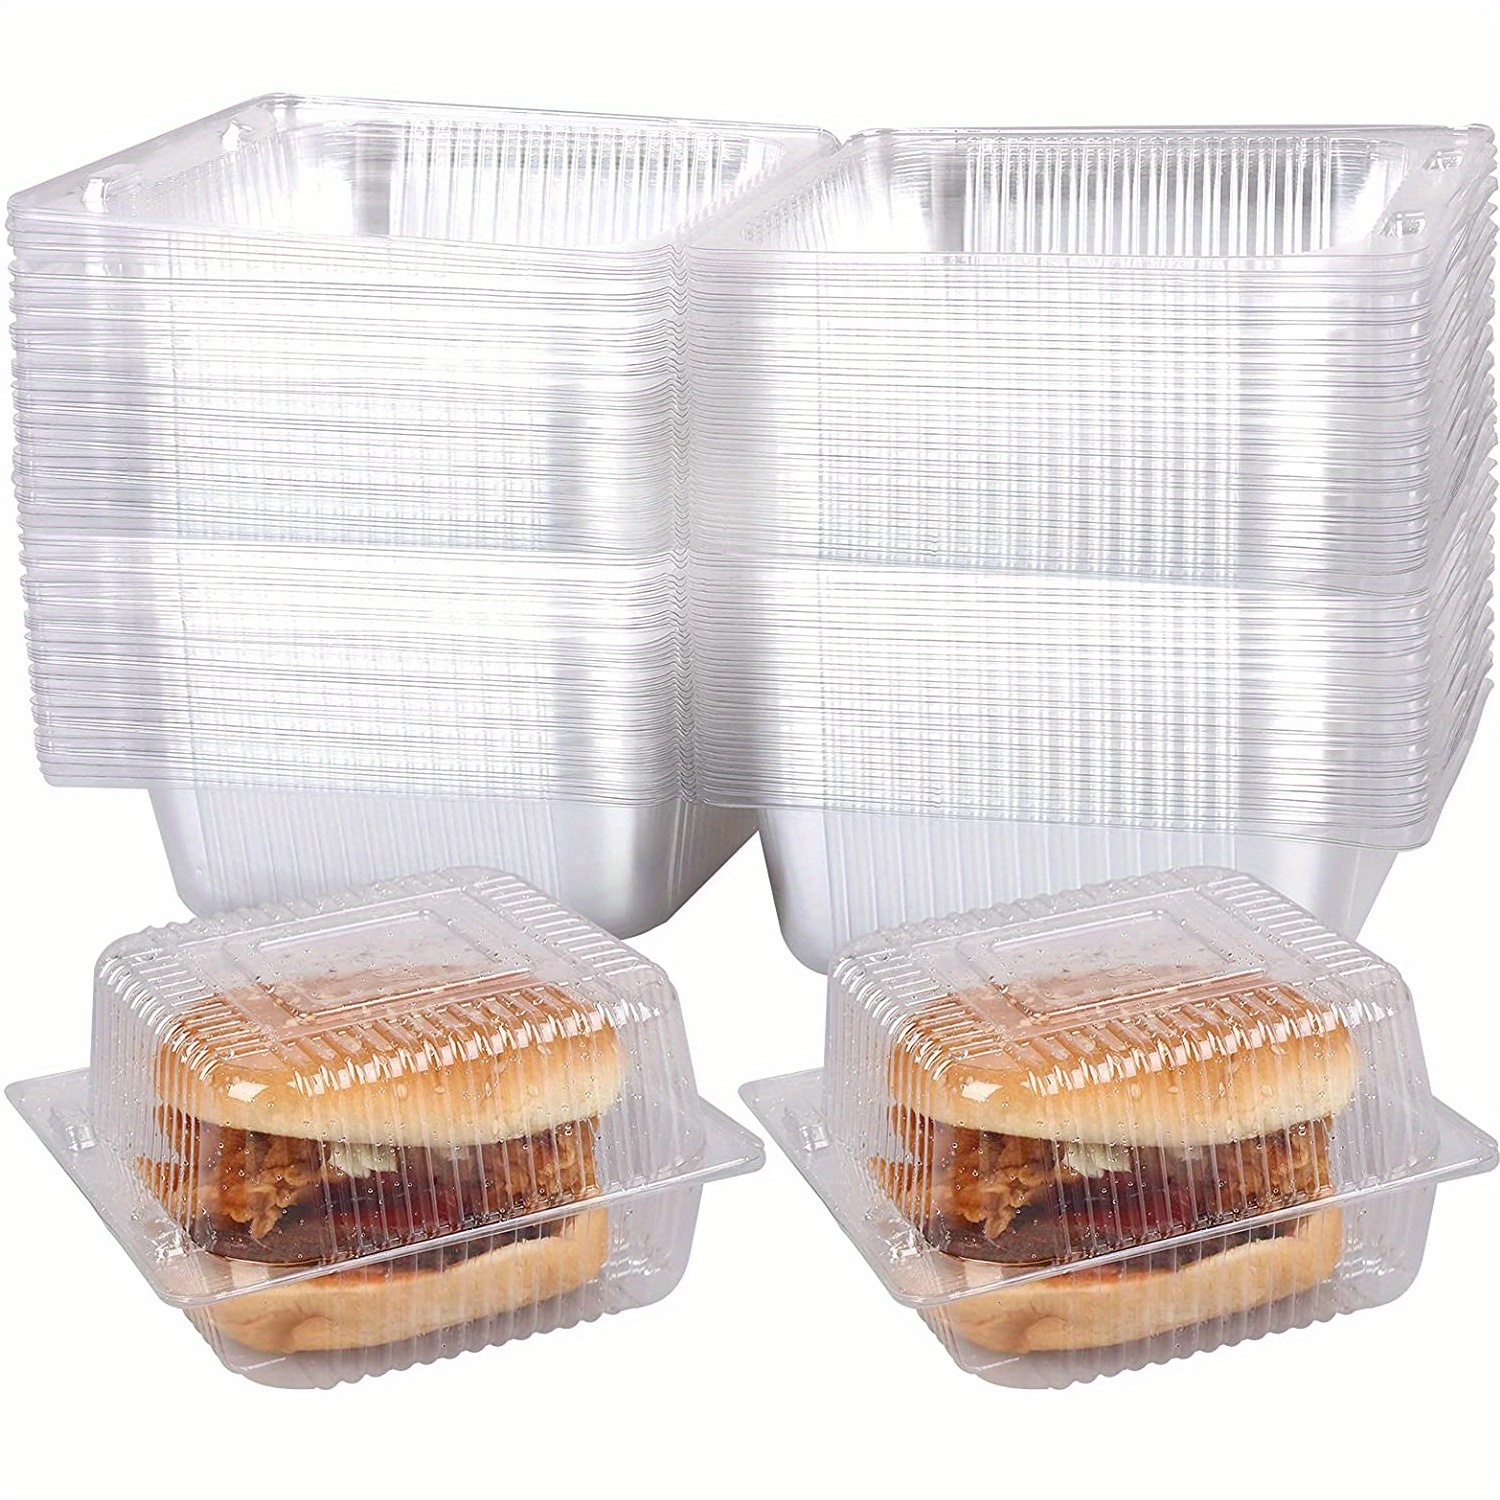 Zezzxu 50 Pack Clamshell Food Containers, Clear Plastic Hinged Take Out  Containers with Lids, 5.1 × 5.3 ×2.5 Disposable Square To Go Boxes for  Food